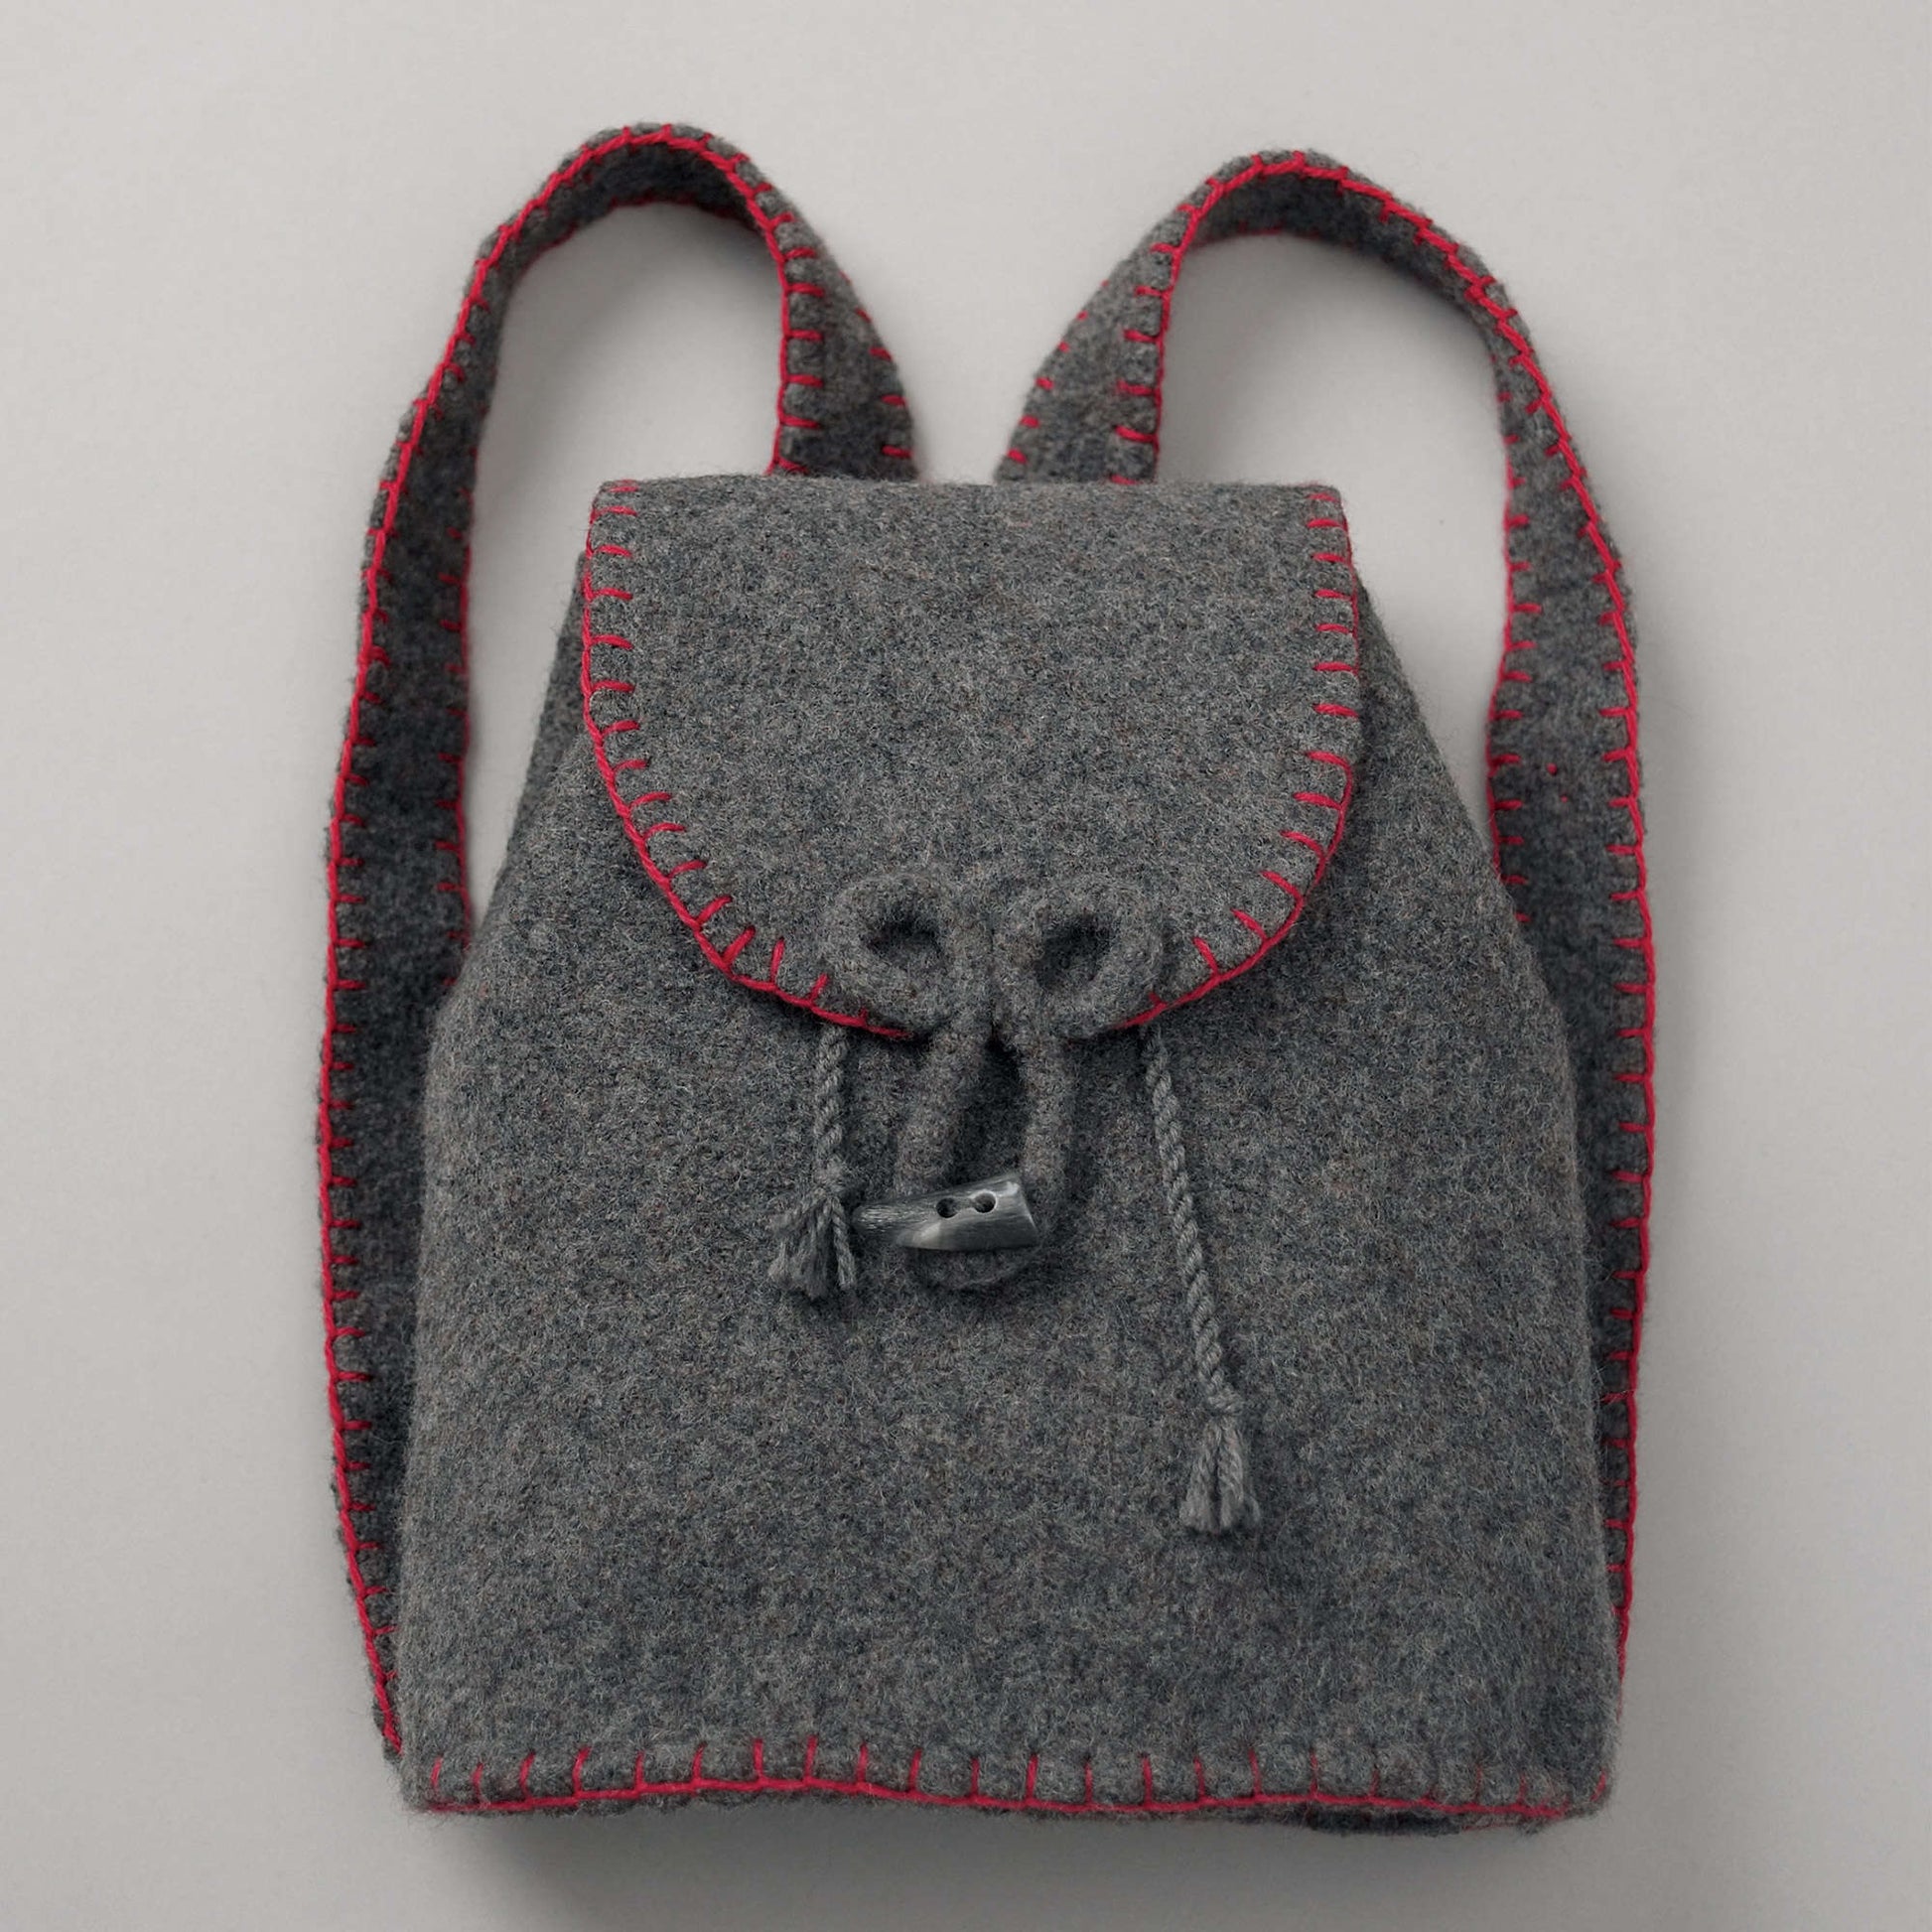 Patons Felted Flannel Backpack Pattern